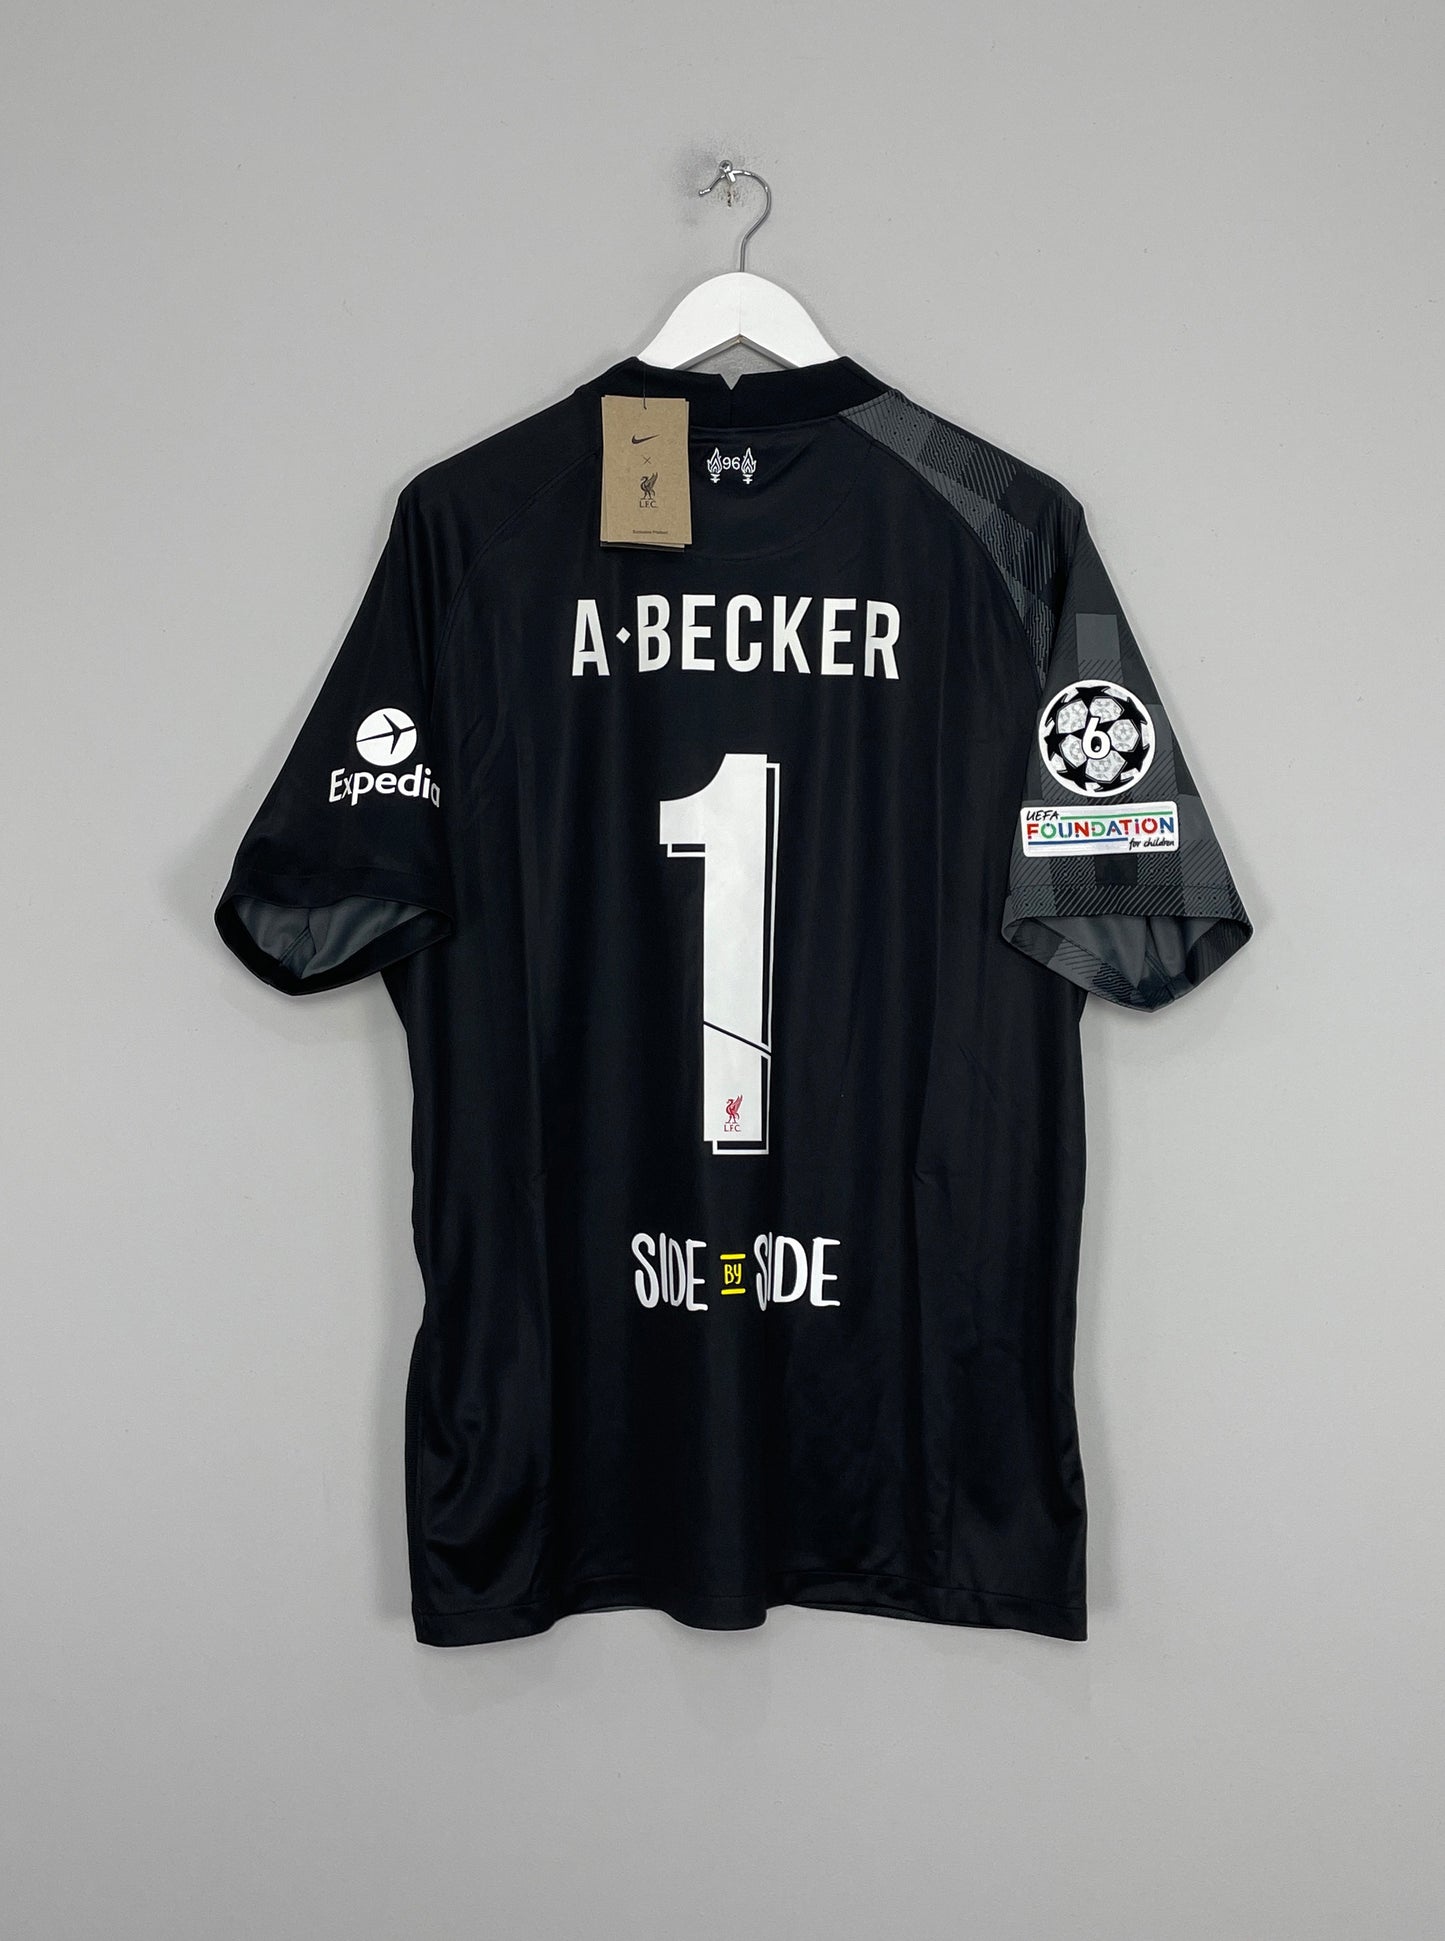 Image of the Liverpool Alisson shirt from the 2021/22 season